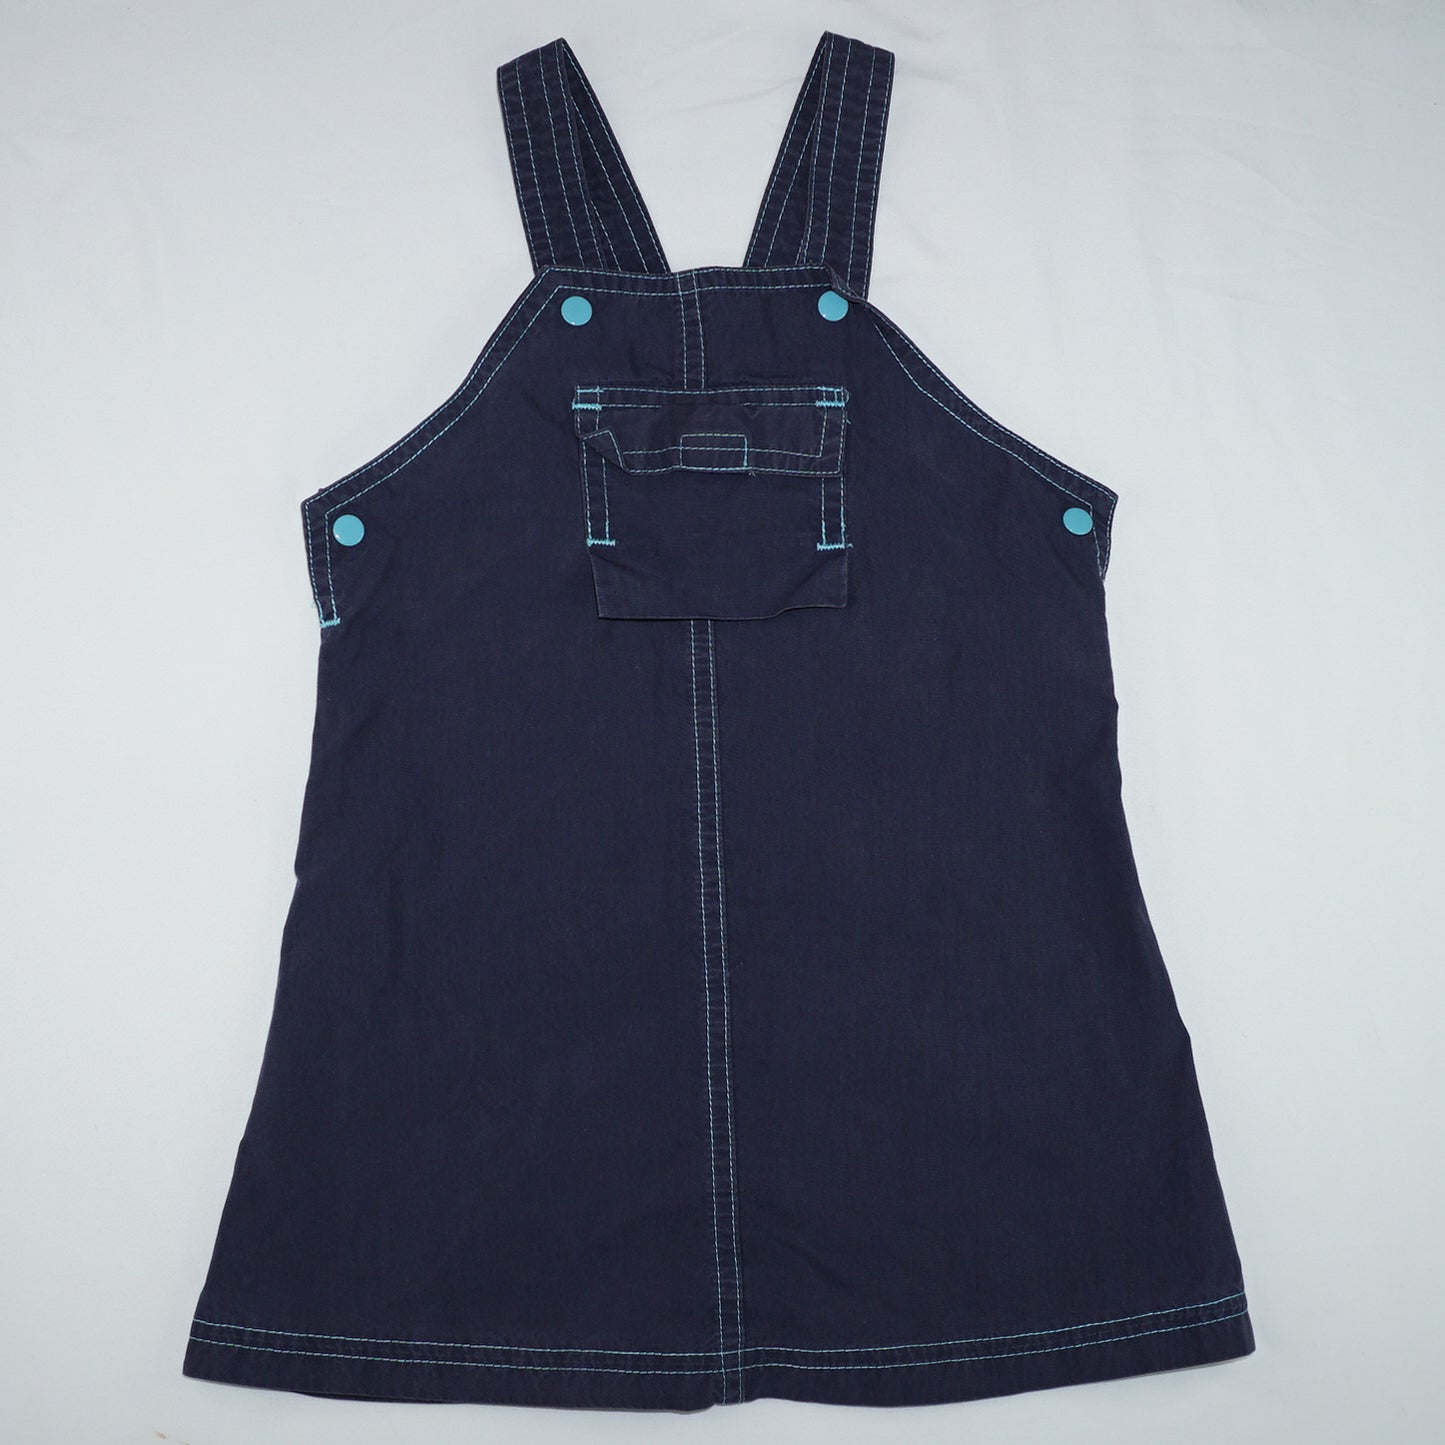 Overall Dress Size 5-6